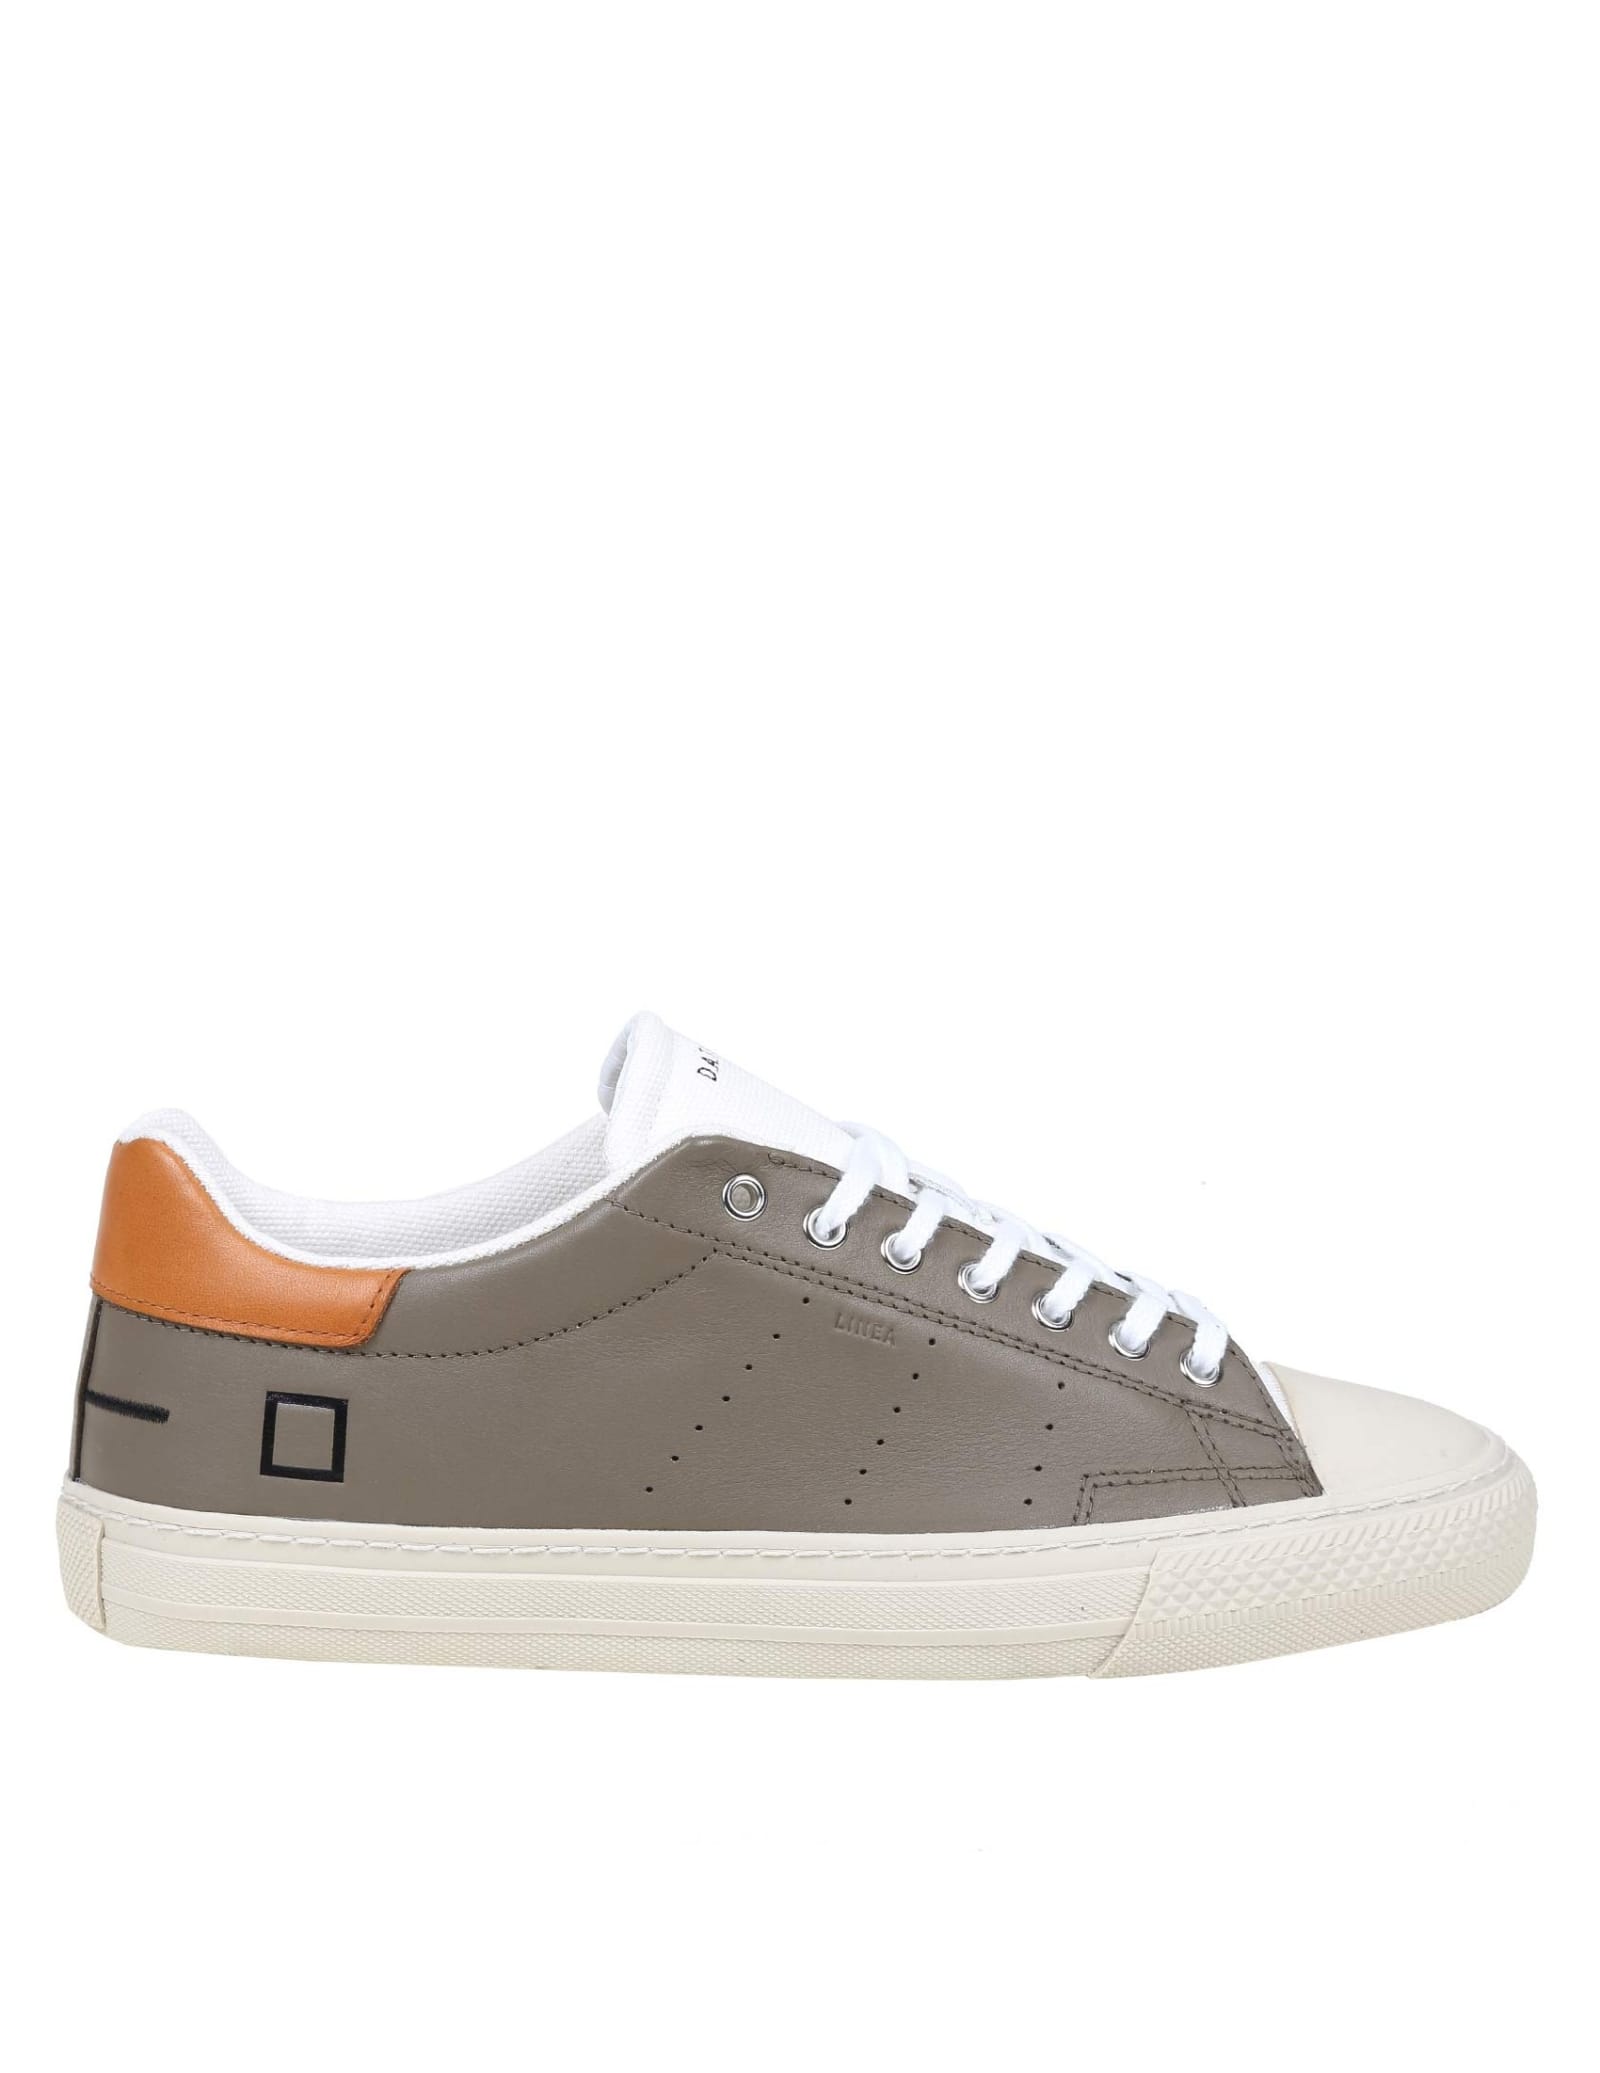 D.A.T.E. Army Color Leather Sneakers